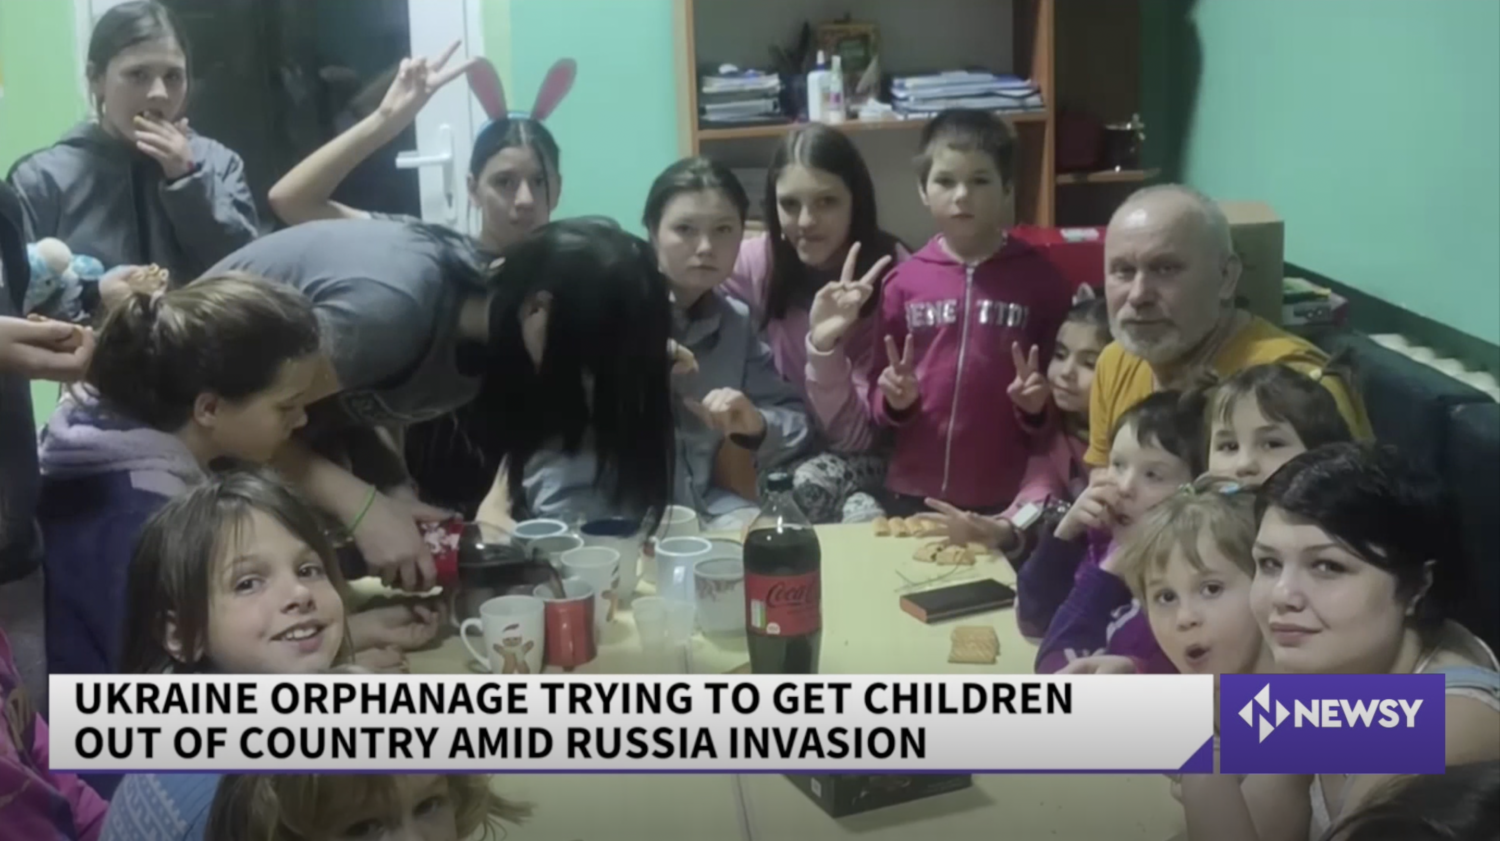 Ukrainian orphanage trying to get children out